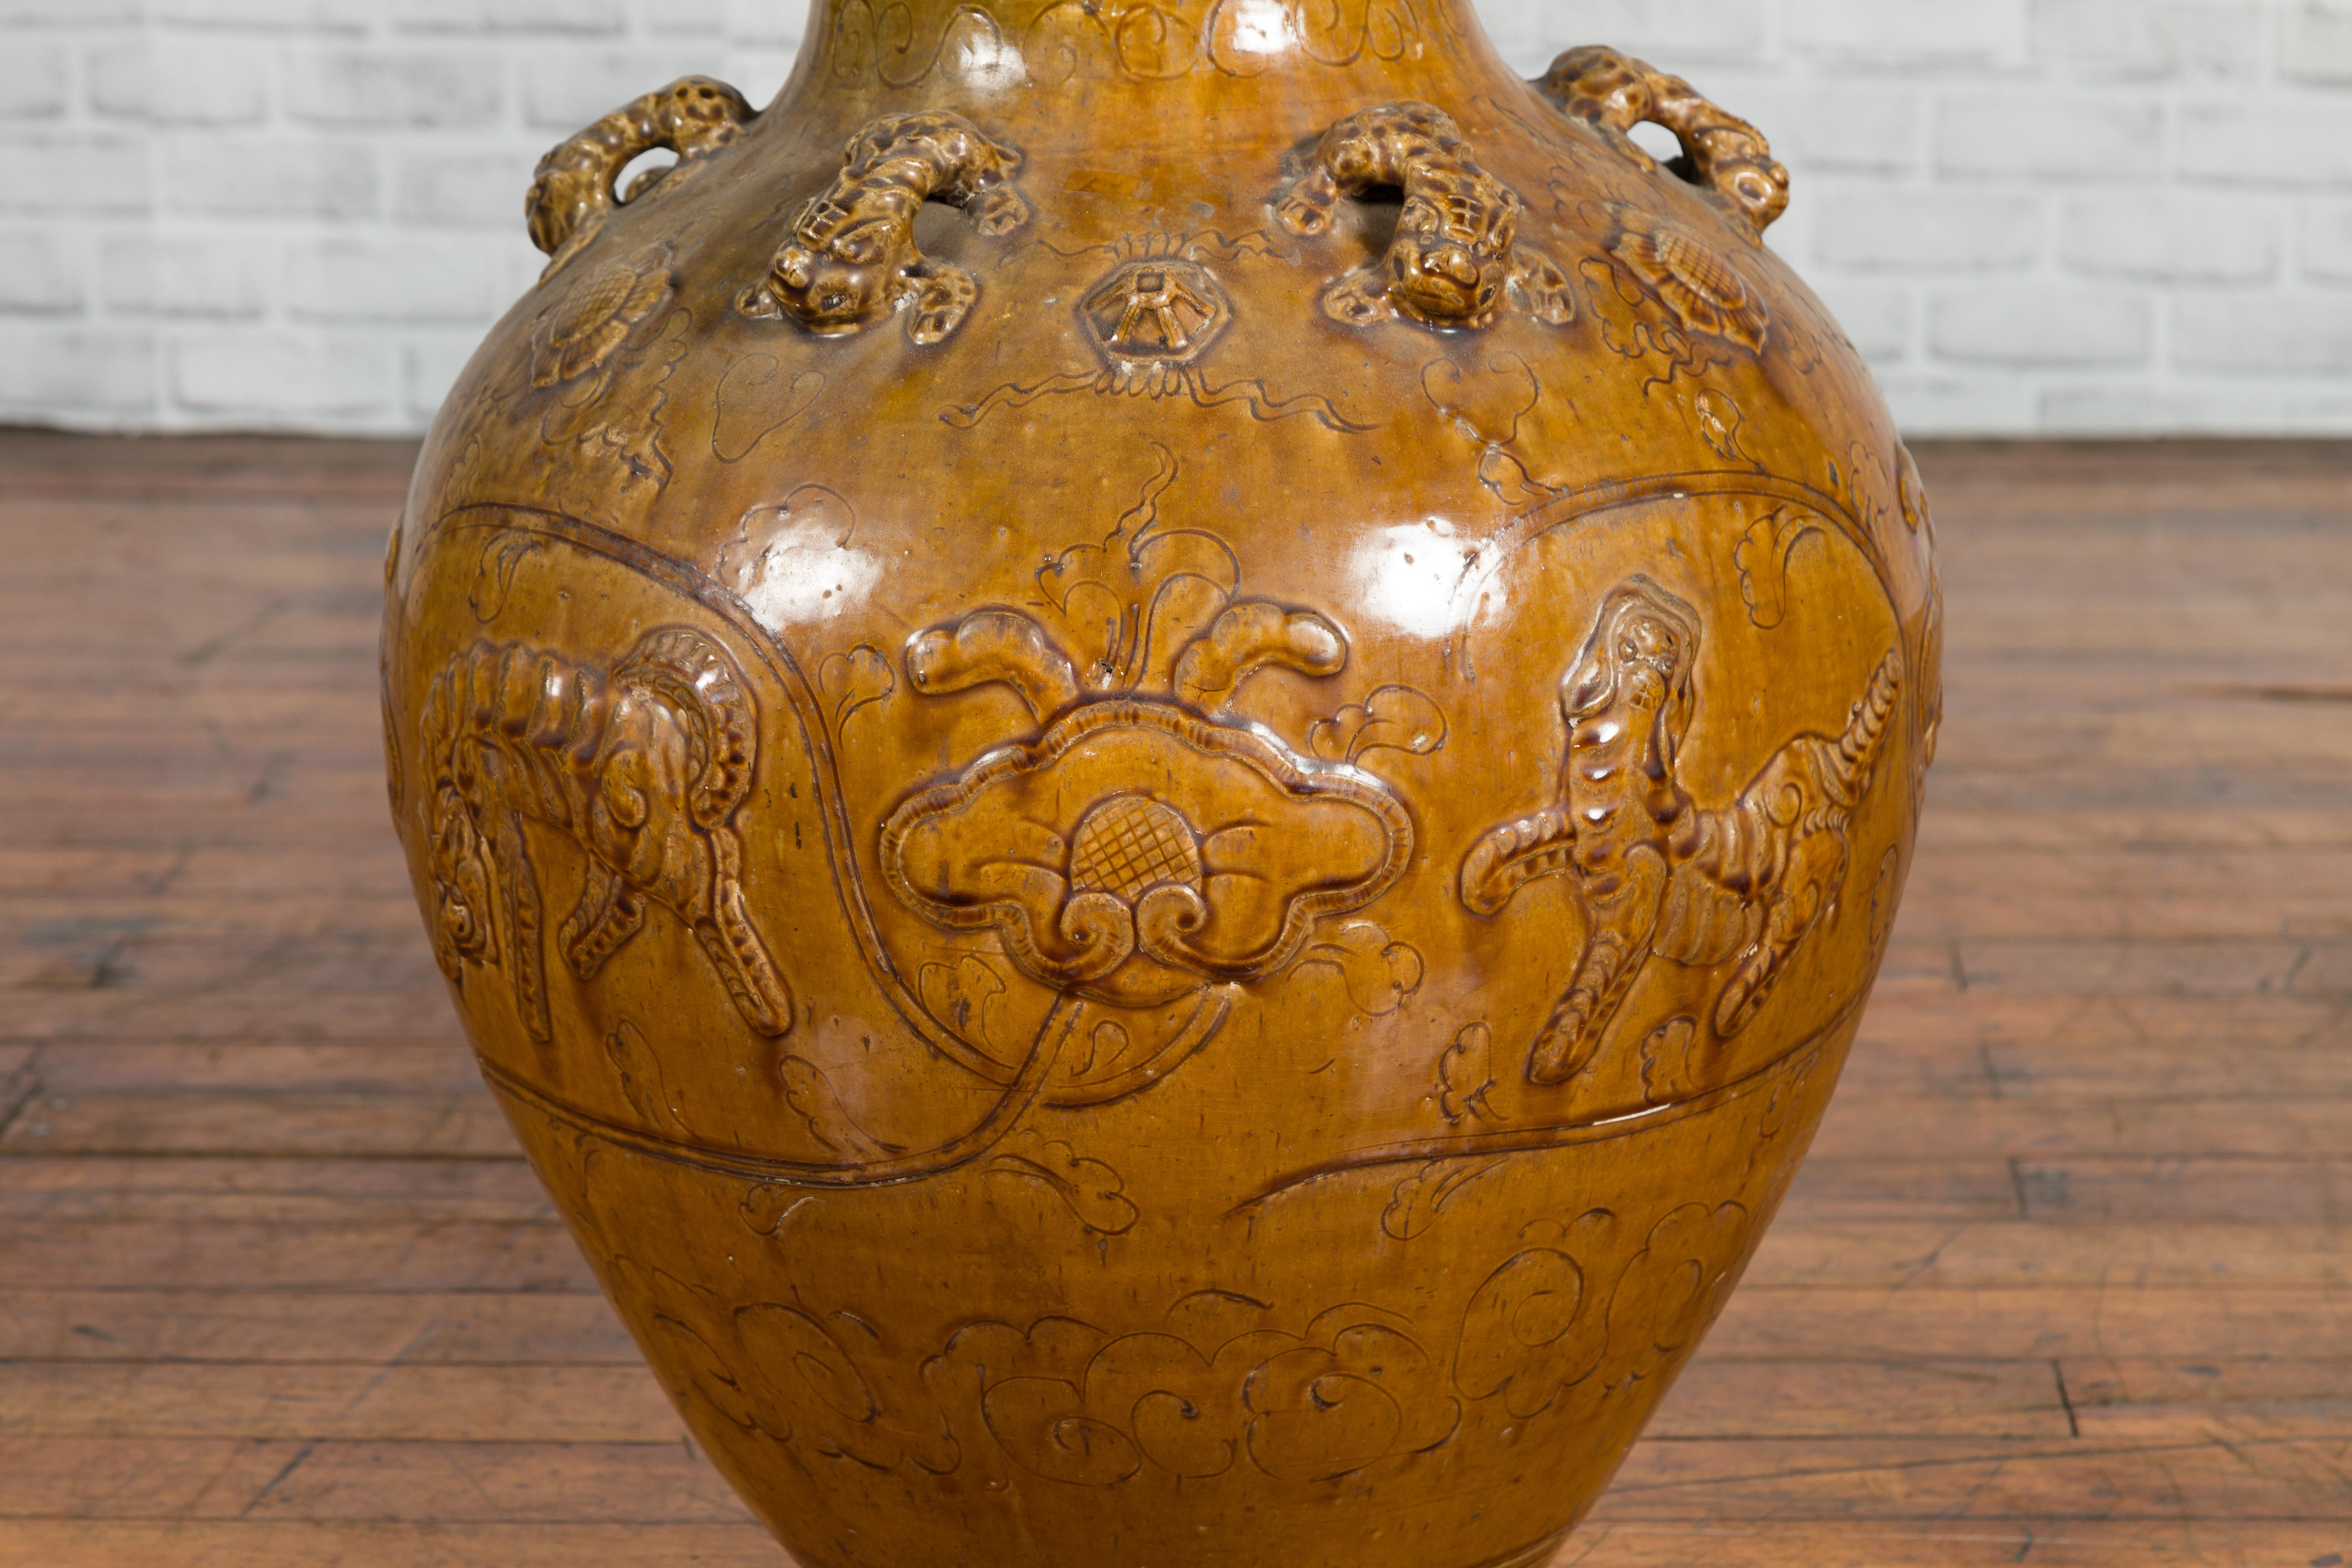 Chinese Ming Dynasty Golden Brown Glazed Martaban Water Jar with Tiger Motifs In Good Condition For Sale In Yonkers, NY